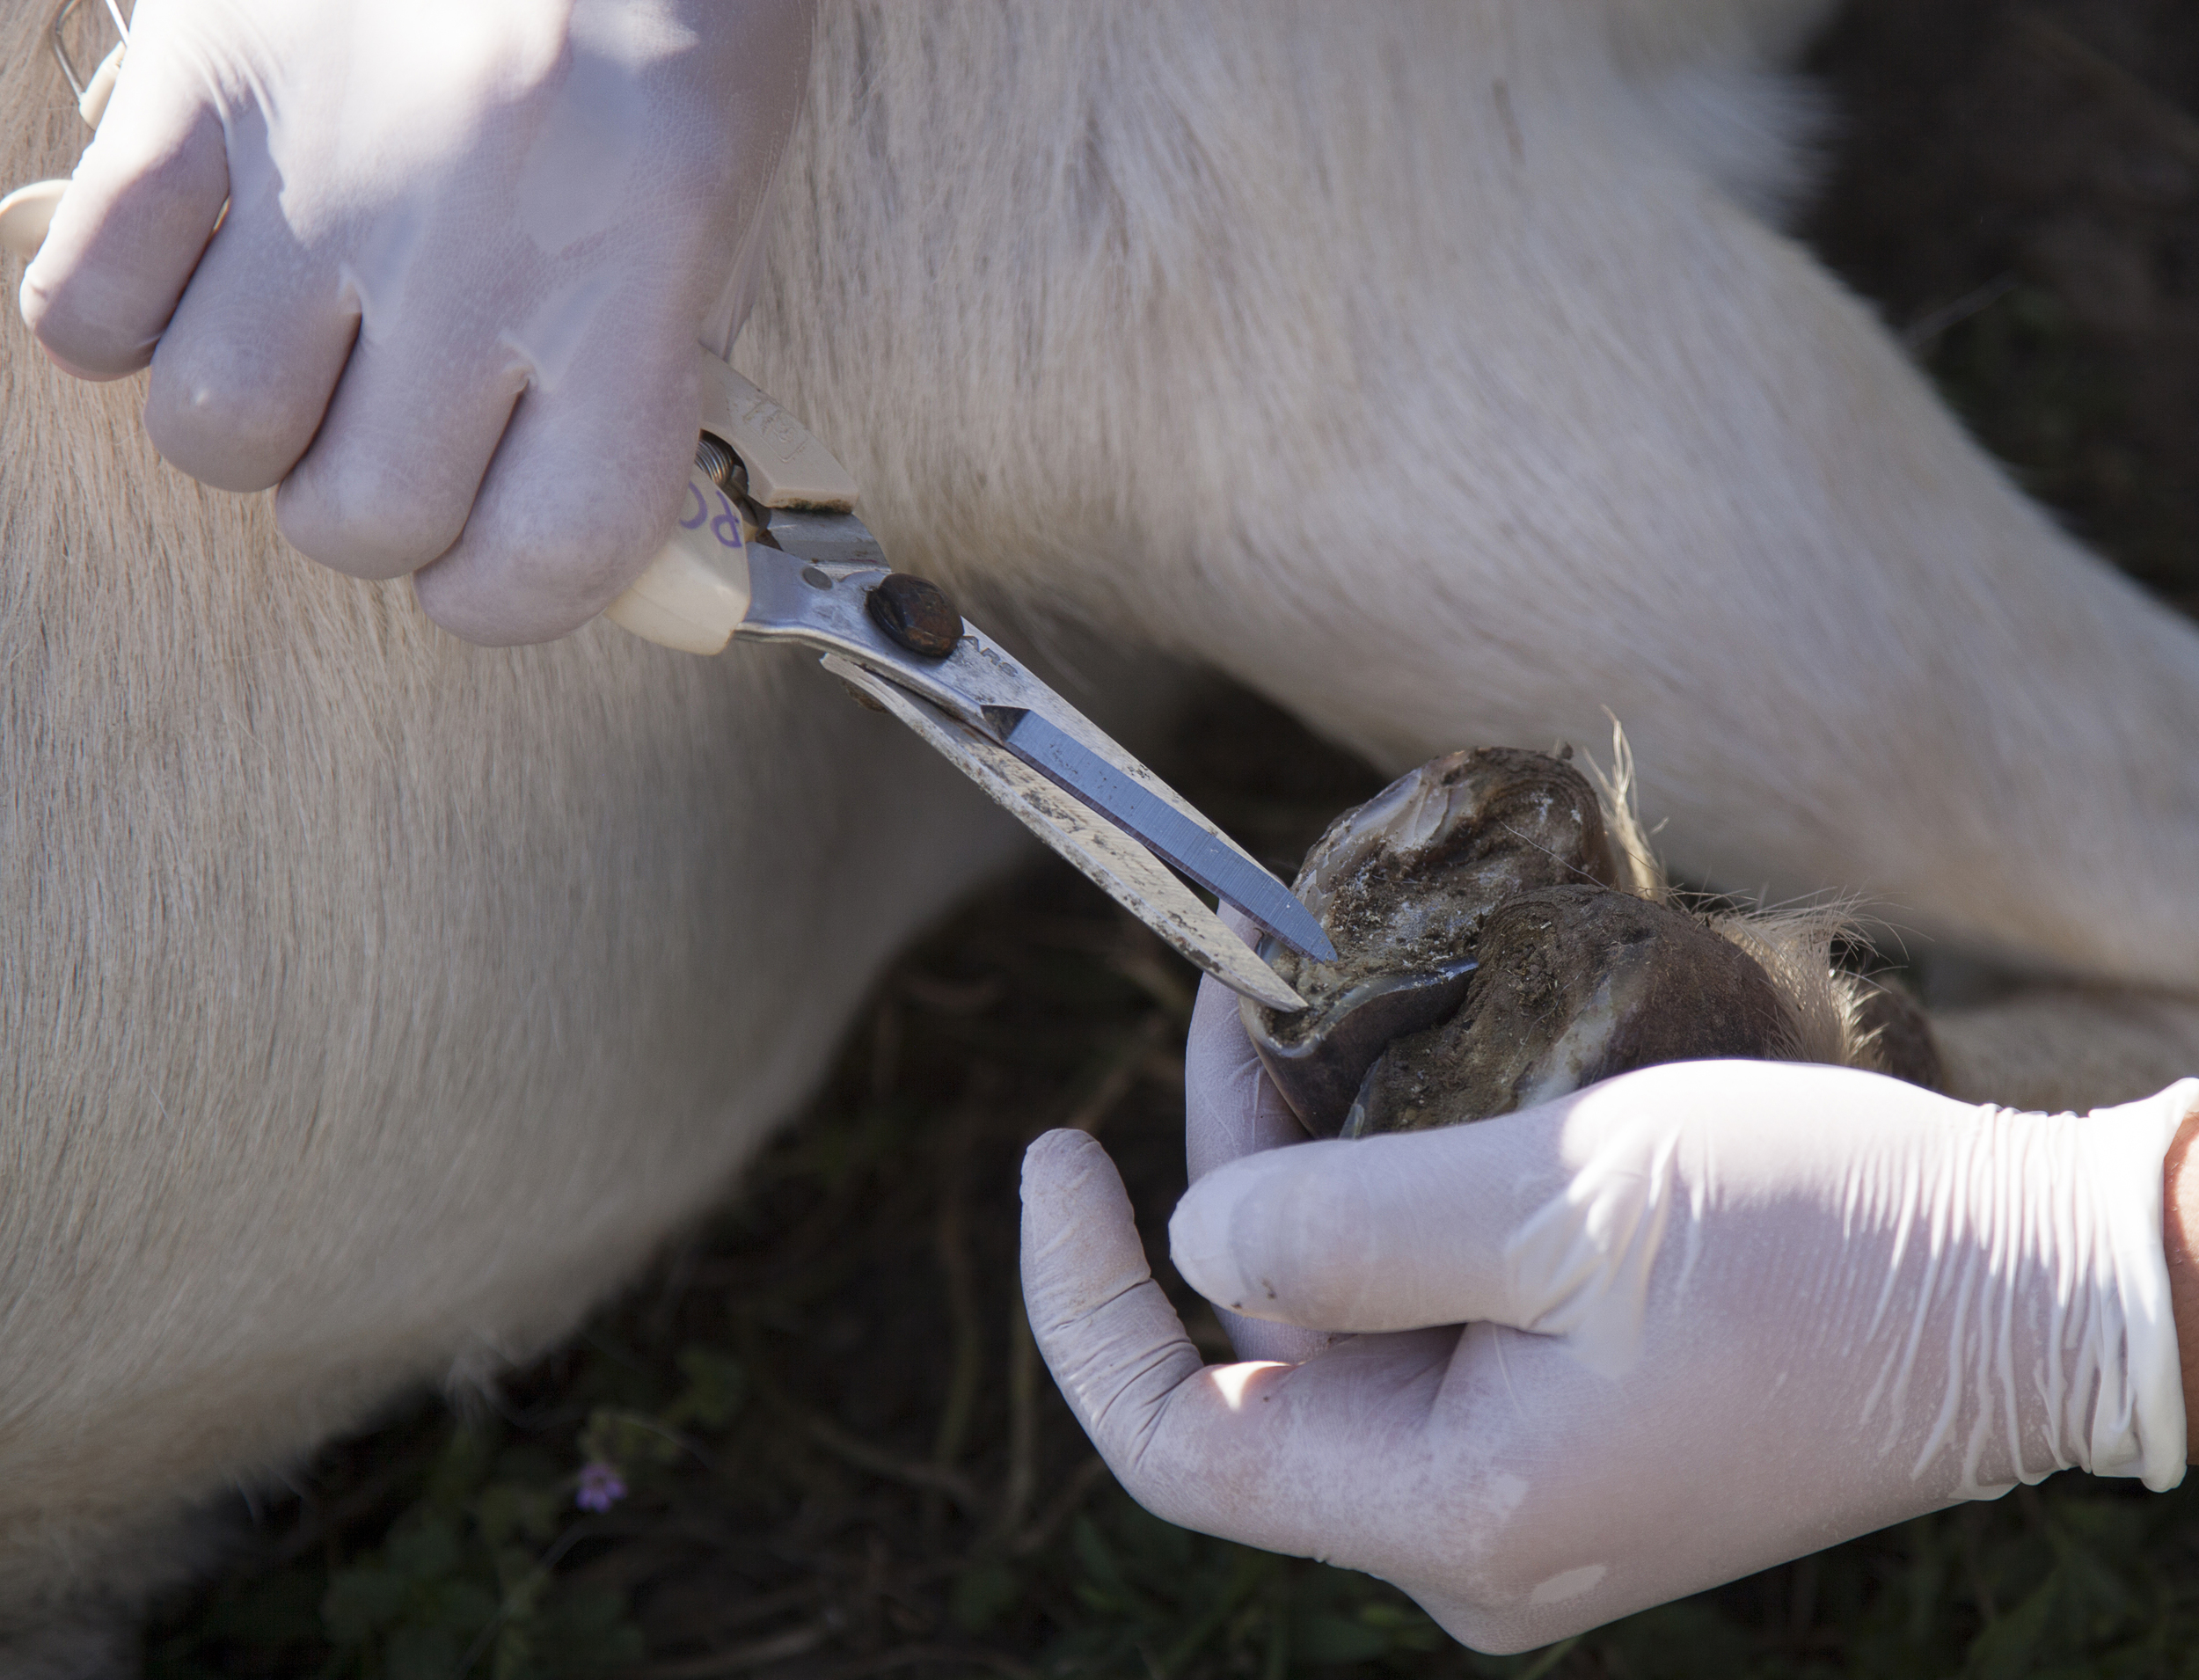  A goat's hoof is trimmed during a routine physical examination on Friday, March 20, 2015 at the Pierce farm. Woodland Hills, Calif.  Read the full story&nbsp; here  